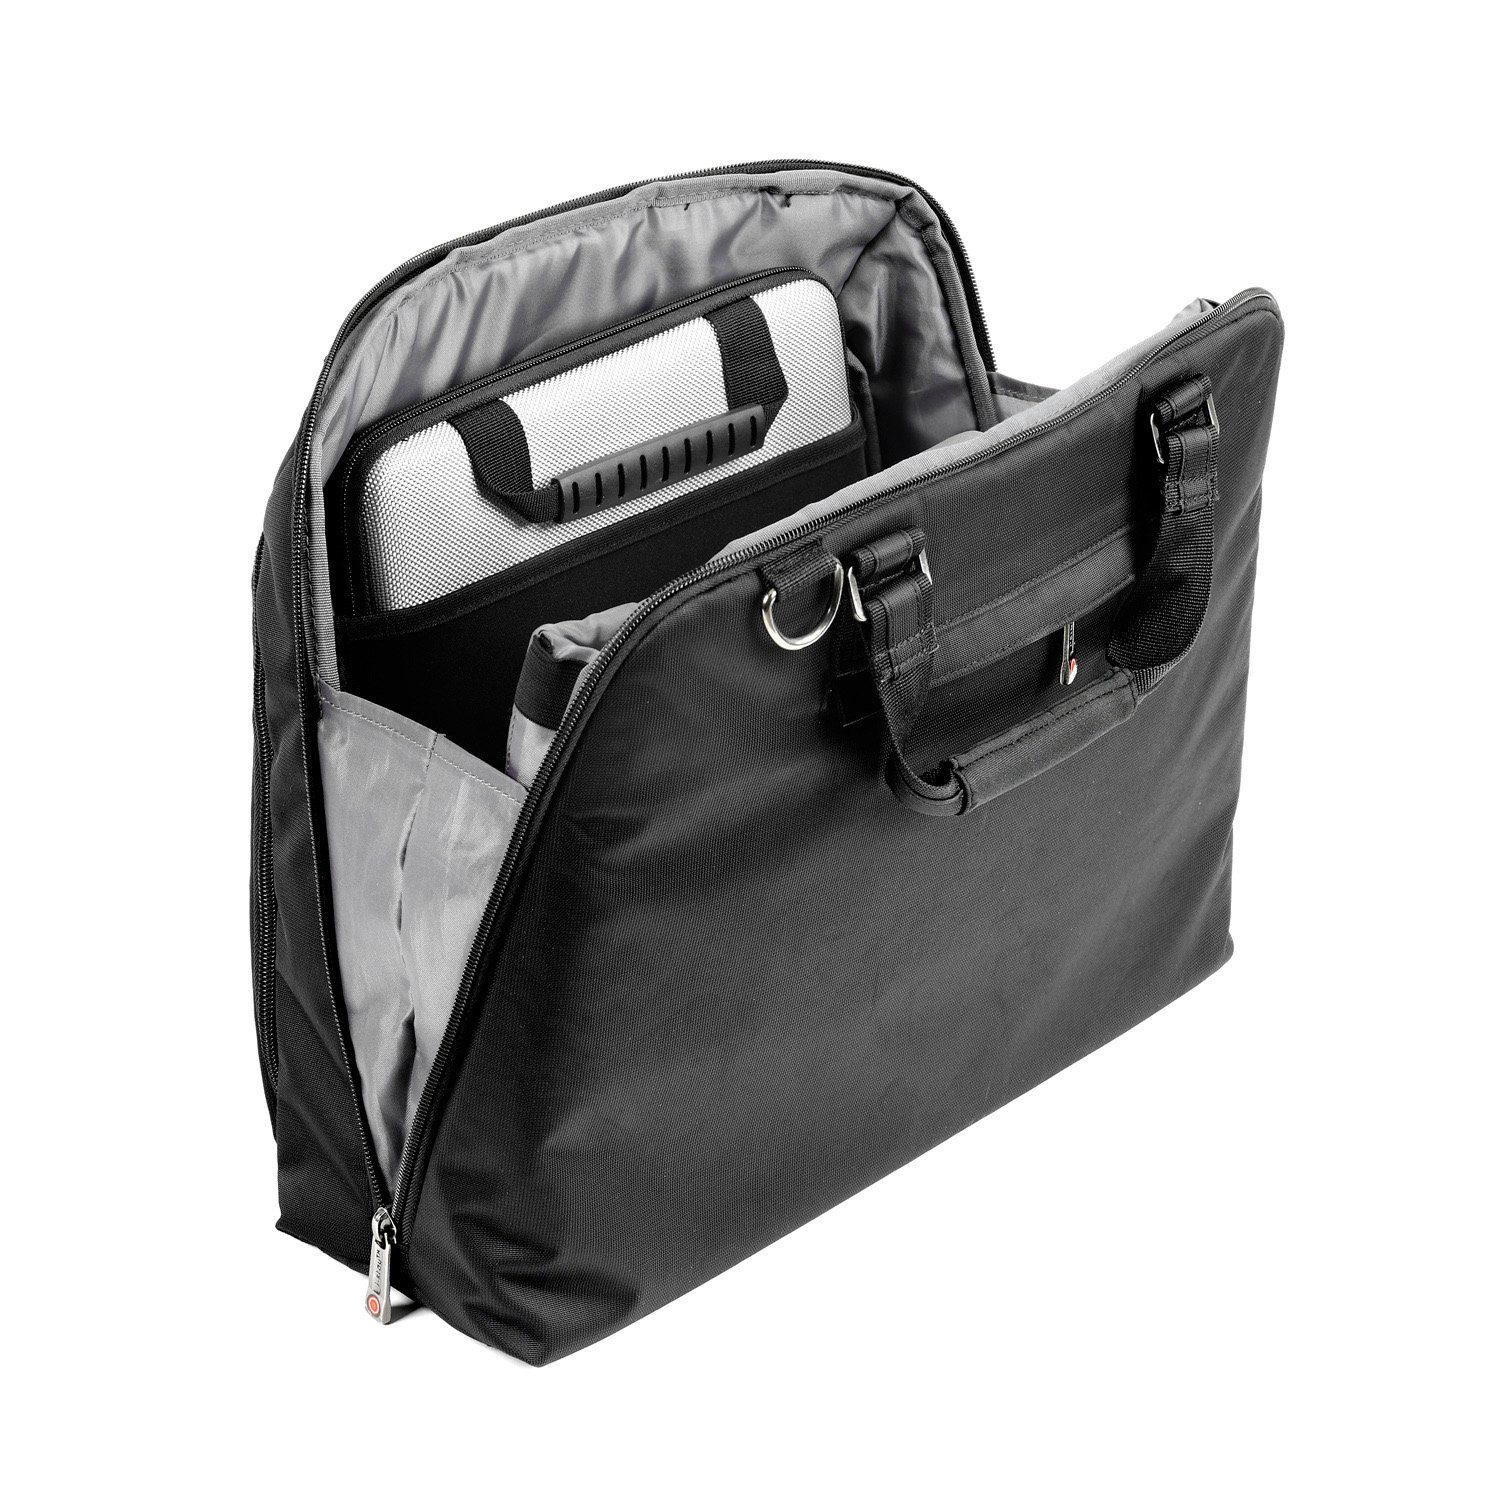 is0106 Laptoptasche 15,6 Zoll I-STAY